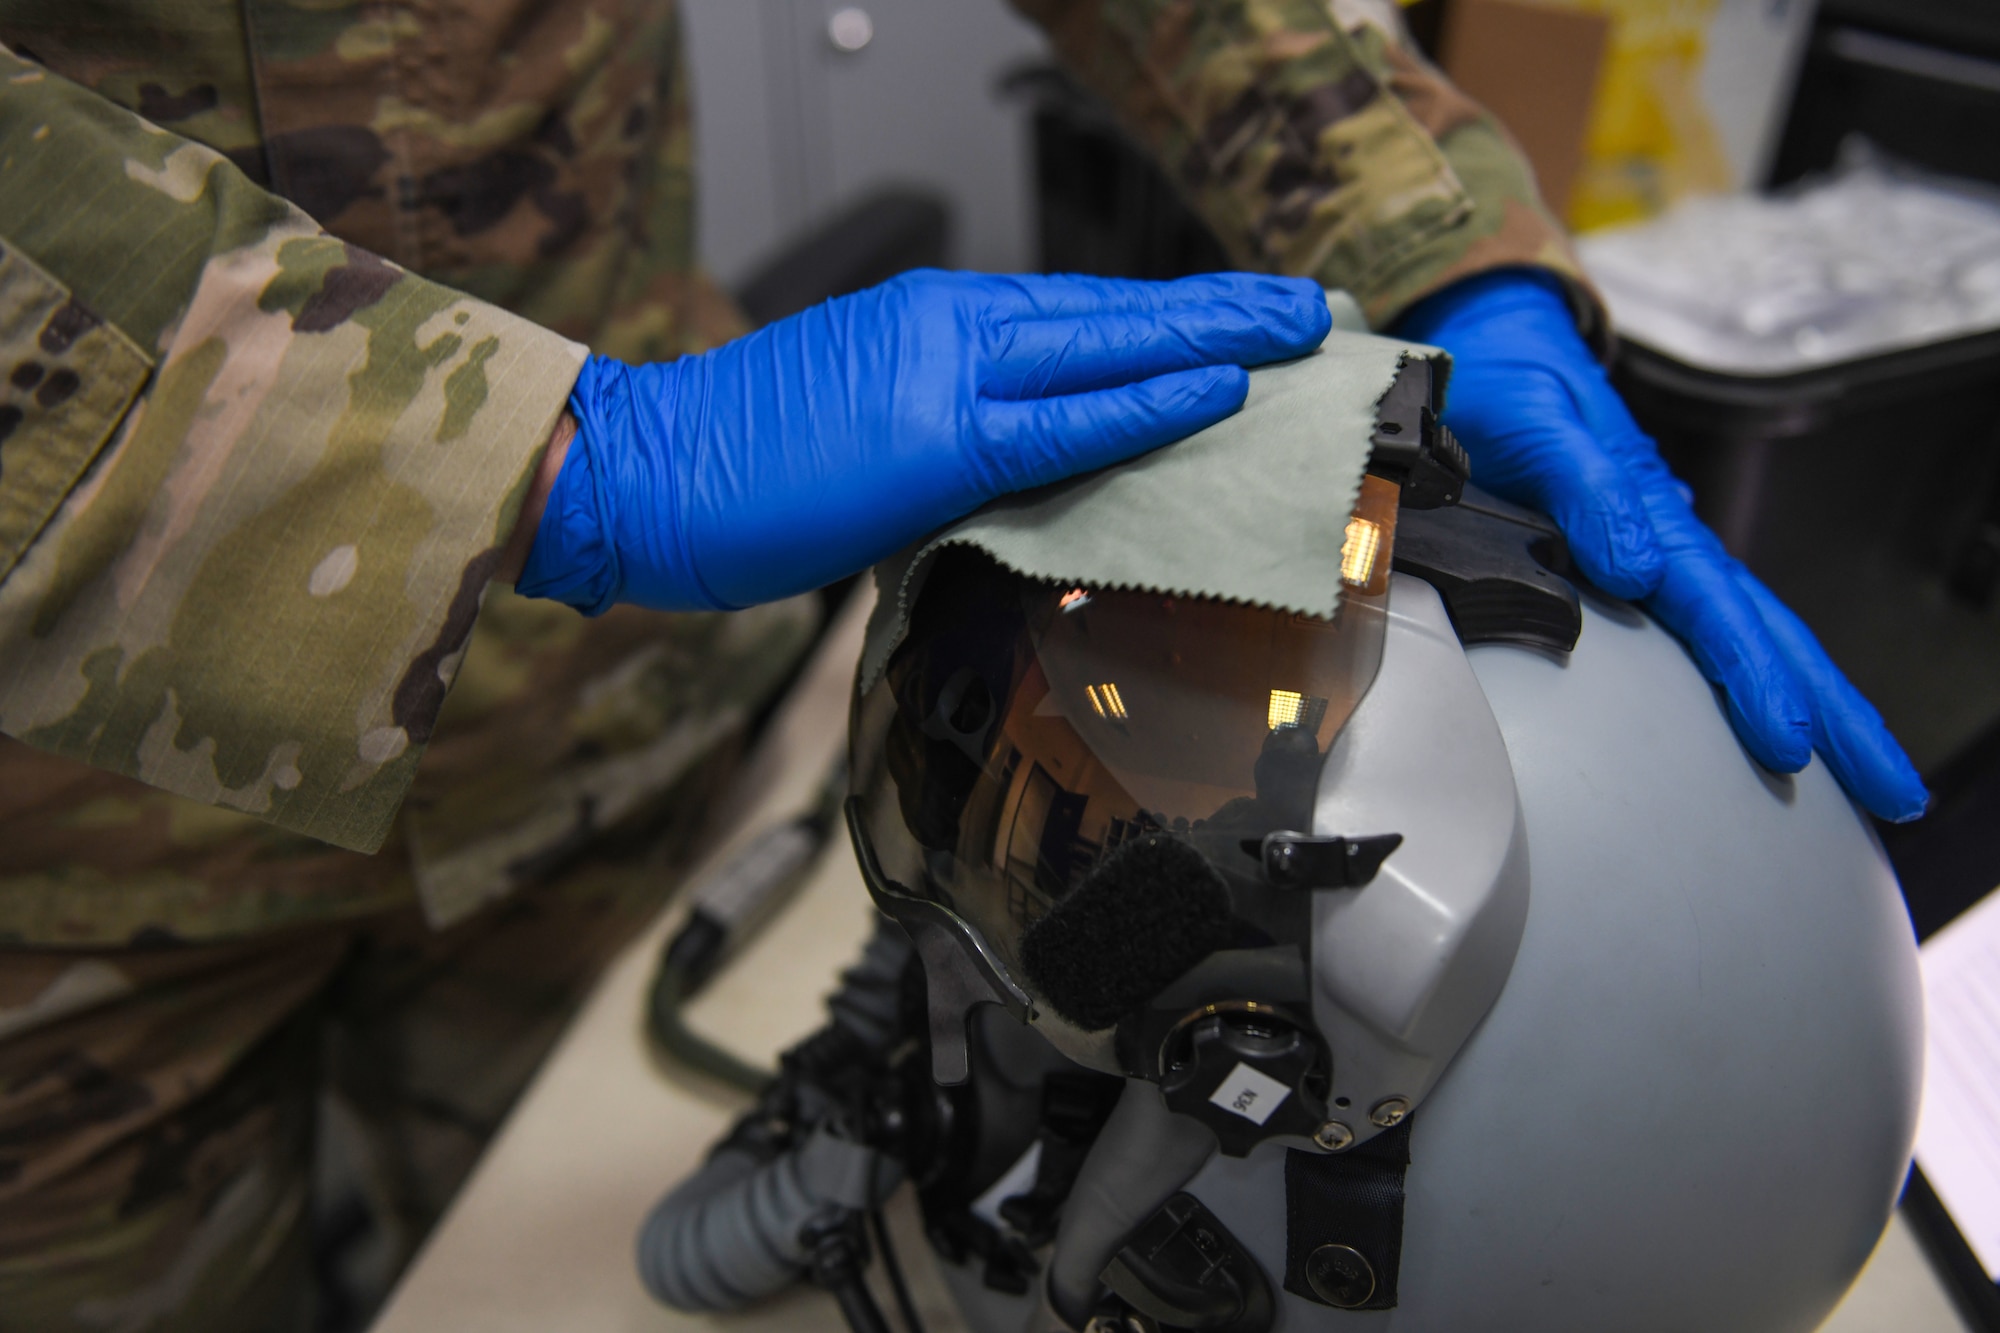 Airman 1st Class Matthew Giordano, 31st Operations Support Squadron aircrew flight equipment technician, cleans a display unit visor during NATO enhanced Air Policing at Graf Ignatievo Air Base, Bulgaria, Oct. 13, 2020. During NATO eAP Giordano is responsible for inspecting and maintaining life-saving equipment to include oxygen masks, life preservers, survival masks, anti-exposure suits, radios and recovery kits. (U.S. Air Force photo by Airman 1st Class Ericka A. Woolever)